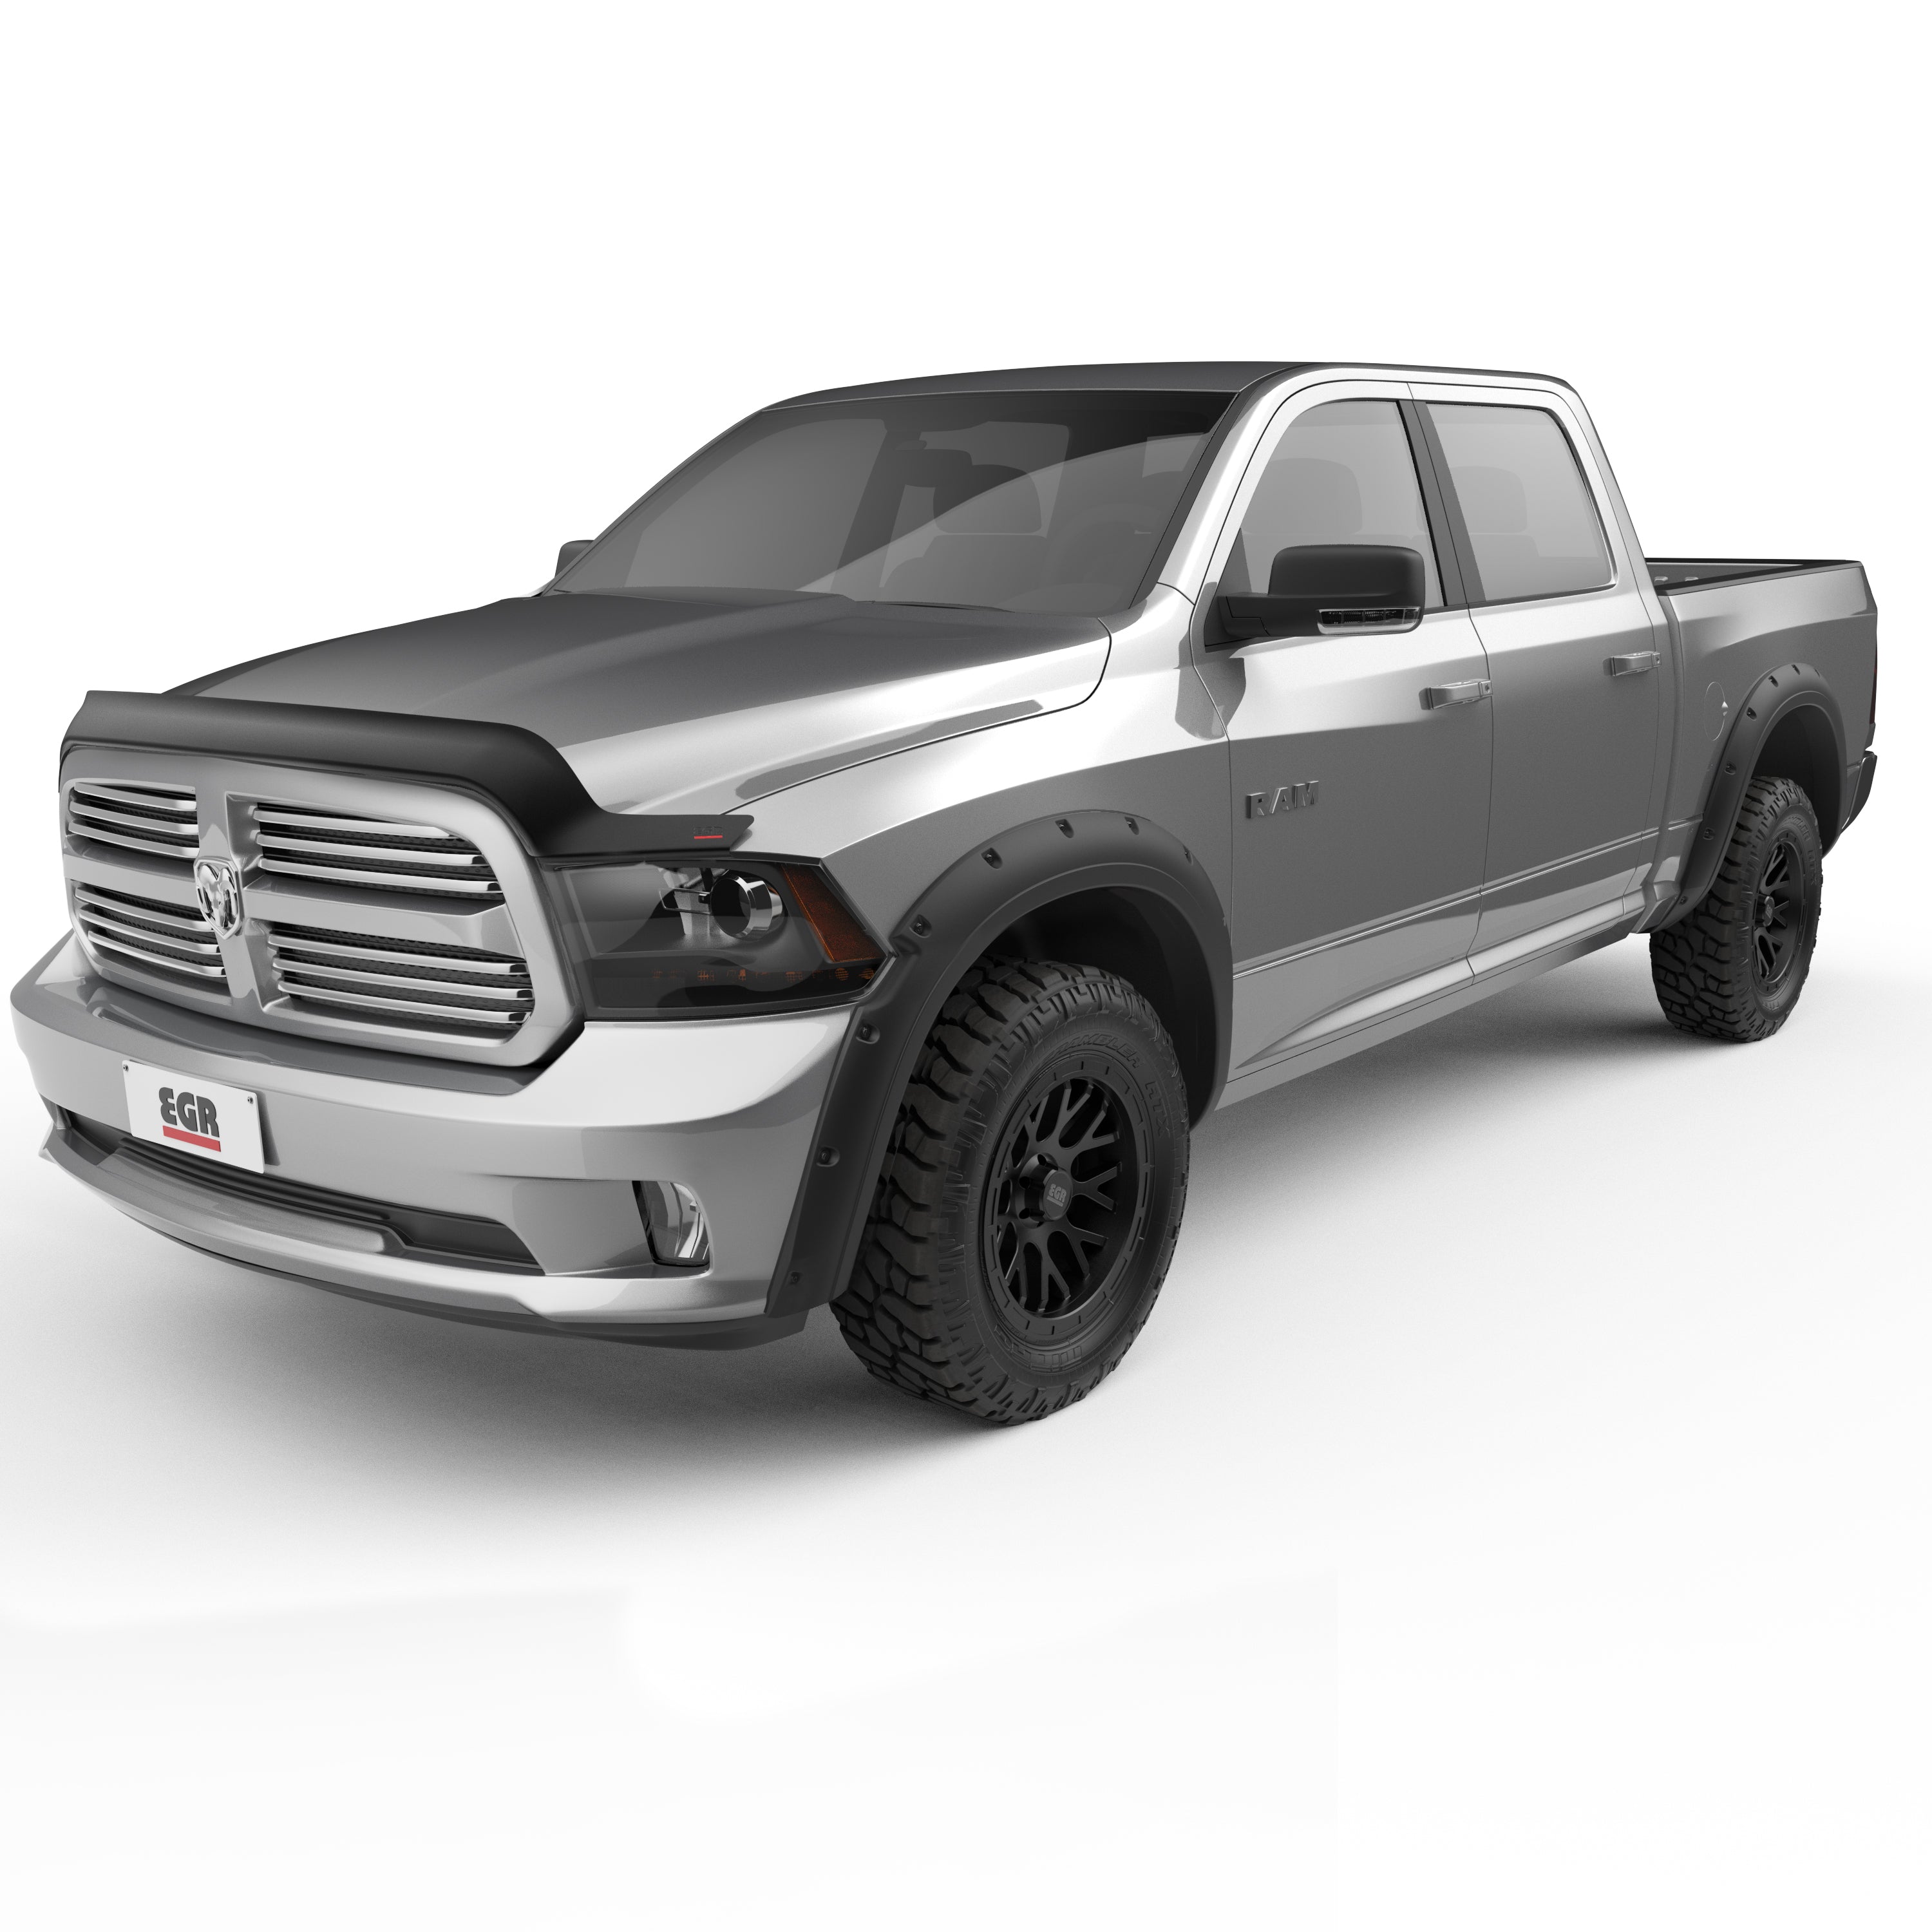 EGR Traditional Bolt-on look Fender Flares with Black-out Bolt Kit  11-18 Ram 1500 19-22 Ram 1500 Classic set of 4